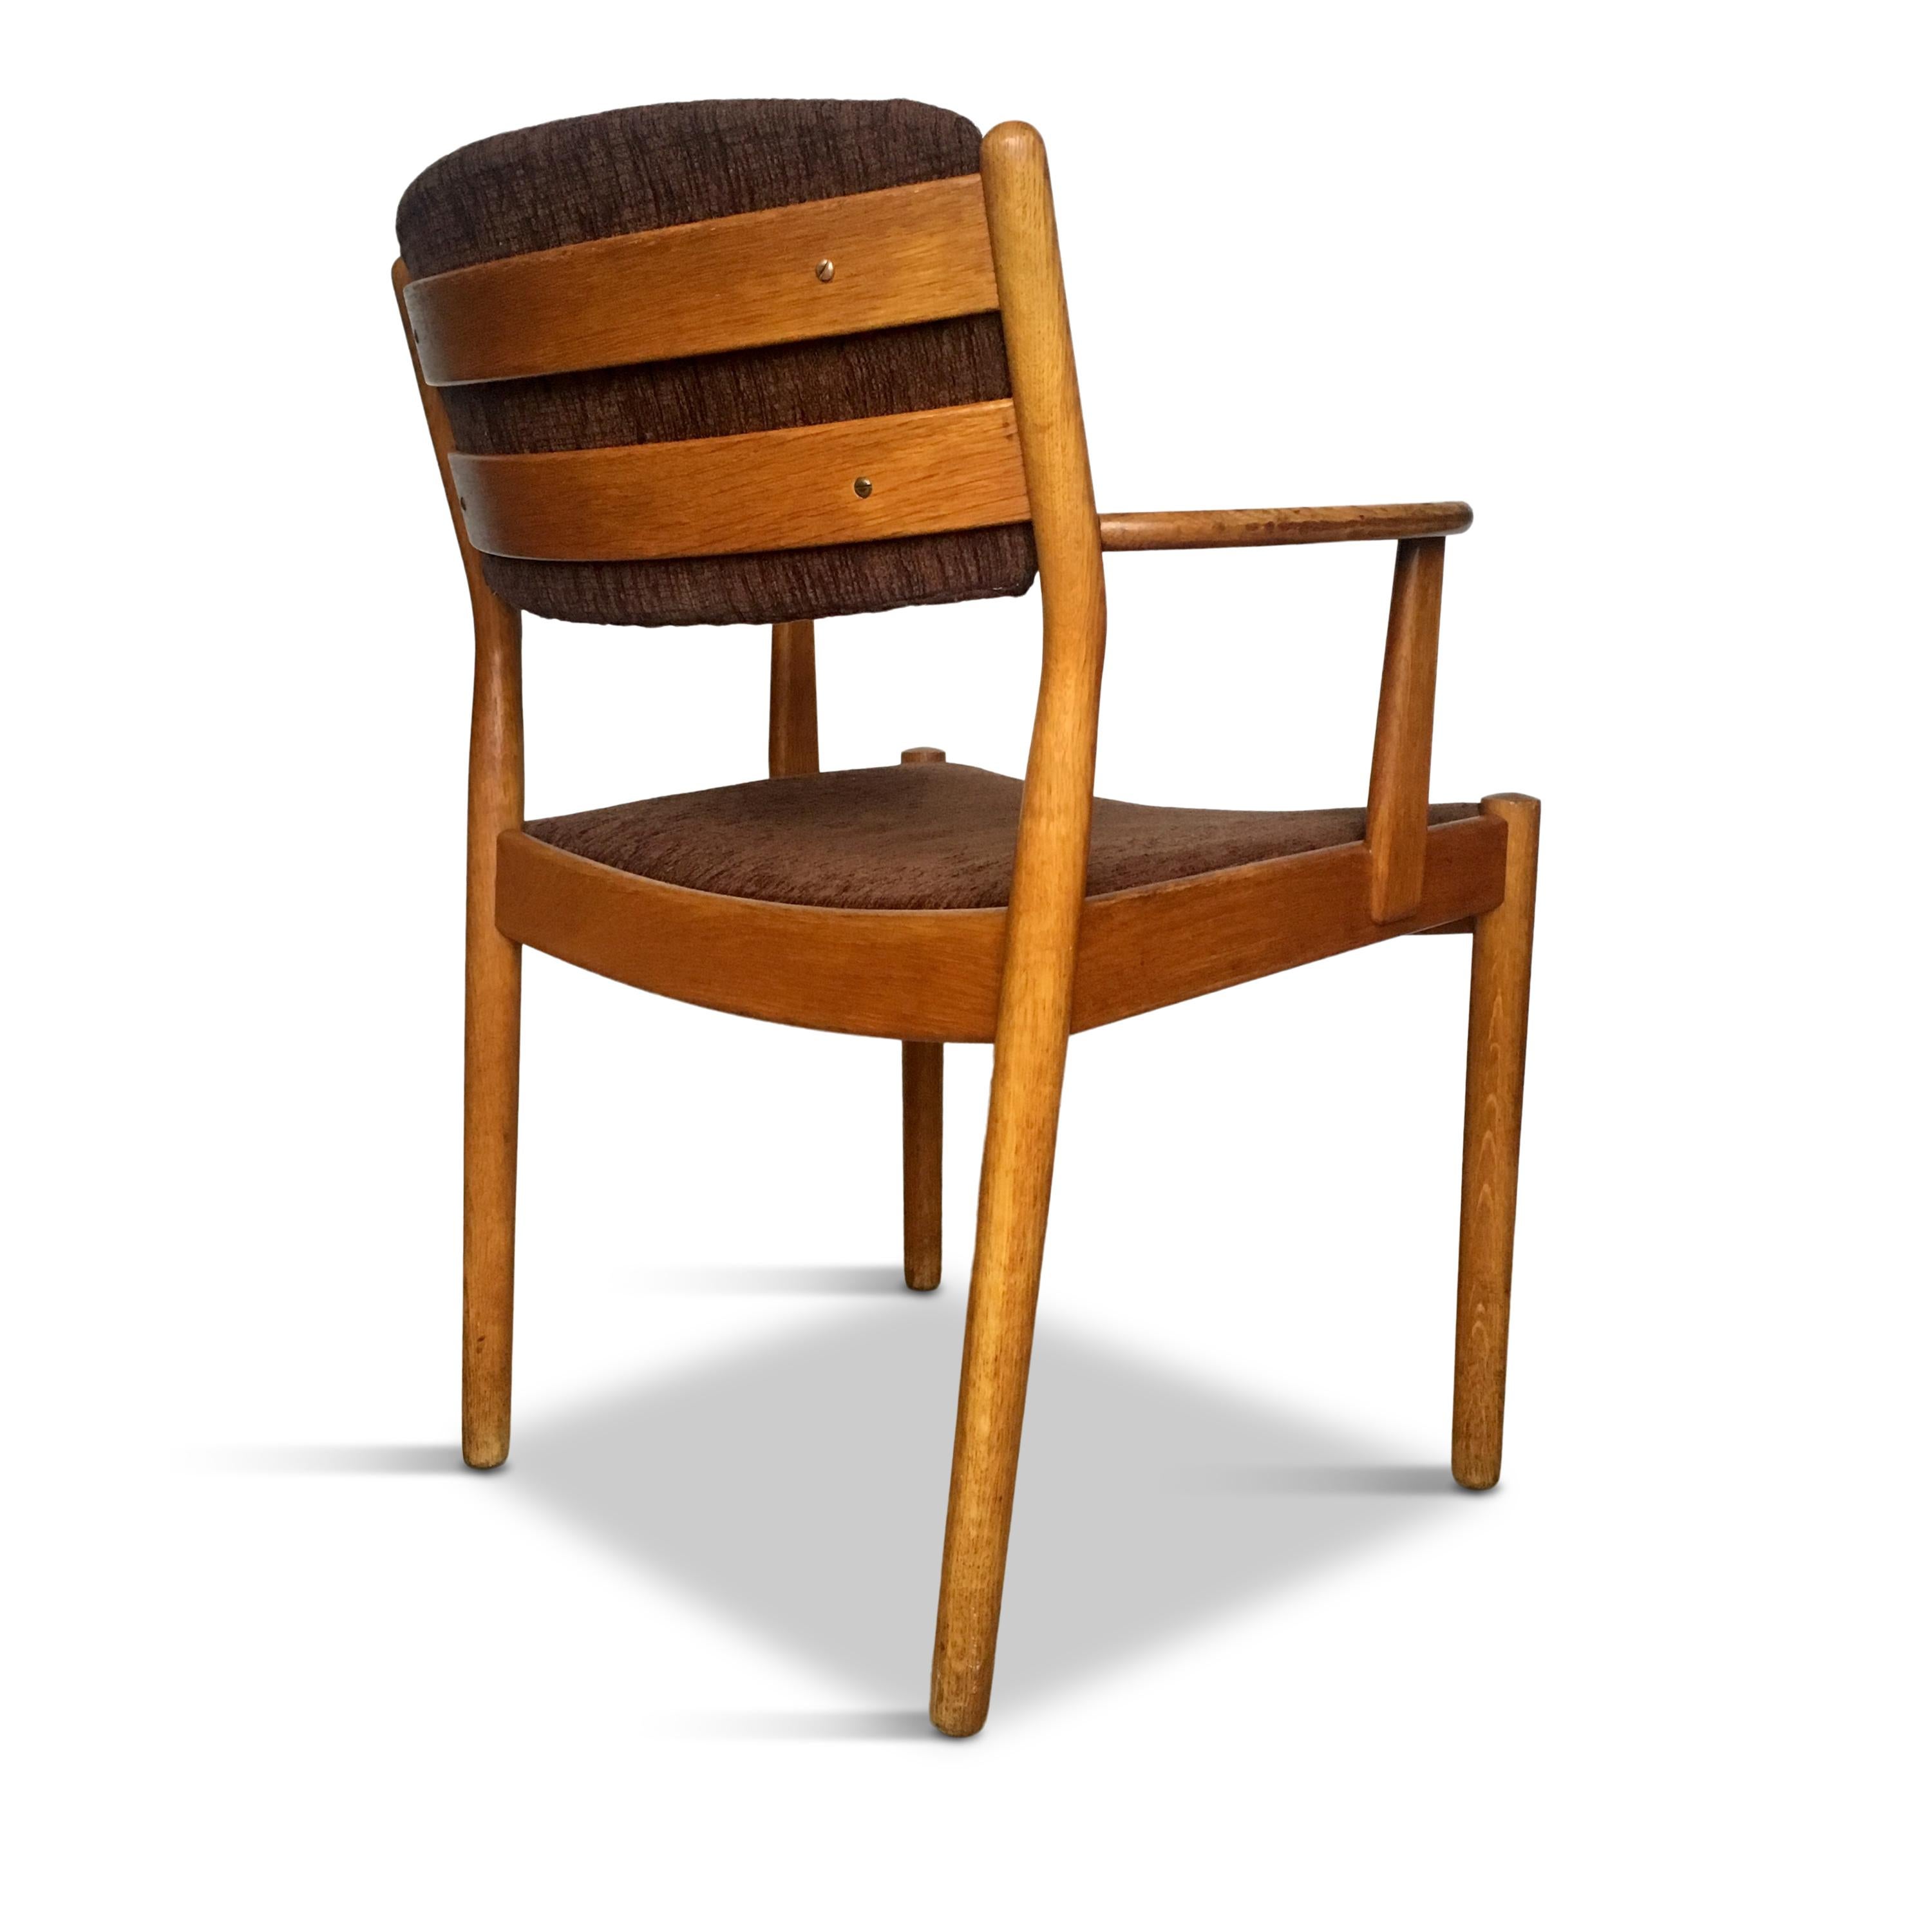 Mid-20th Century Midcentury Danish Oak Armchair by Poul Volther for FDB Møbler, 1950s For Sale